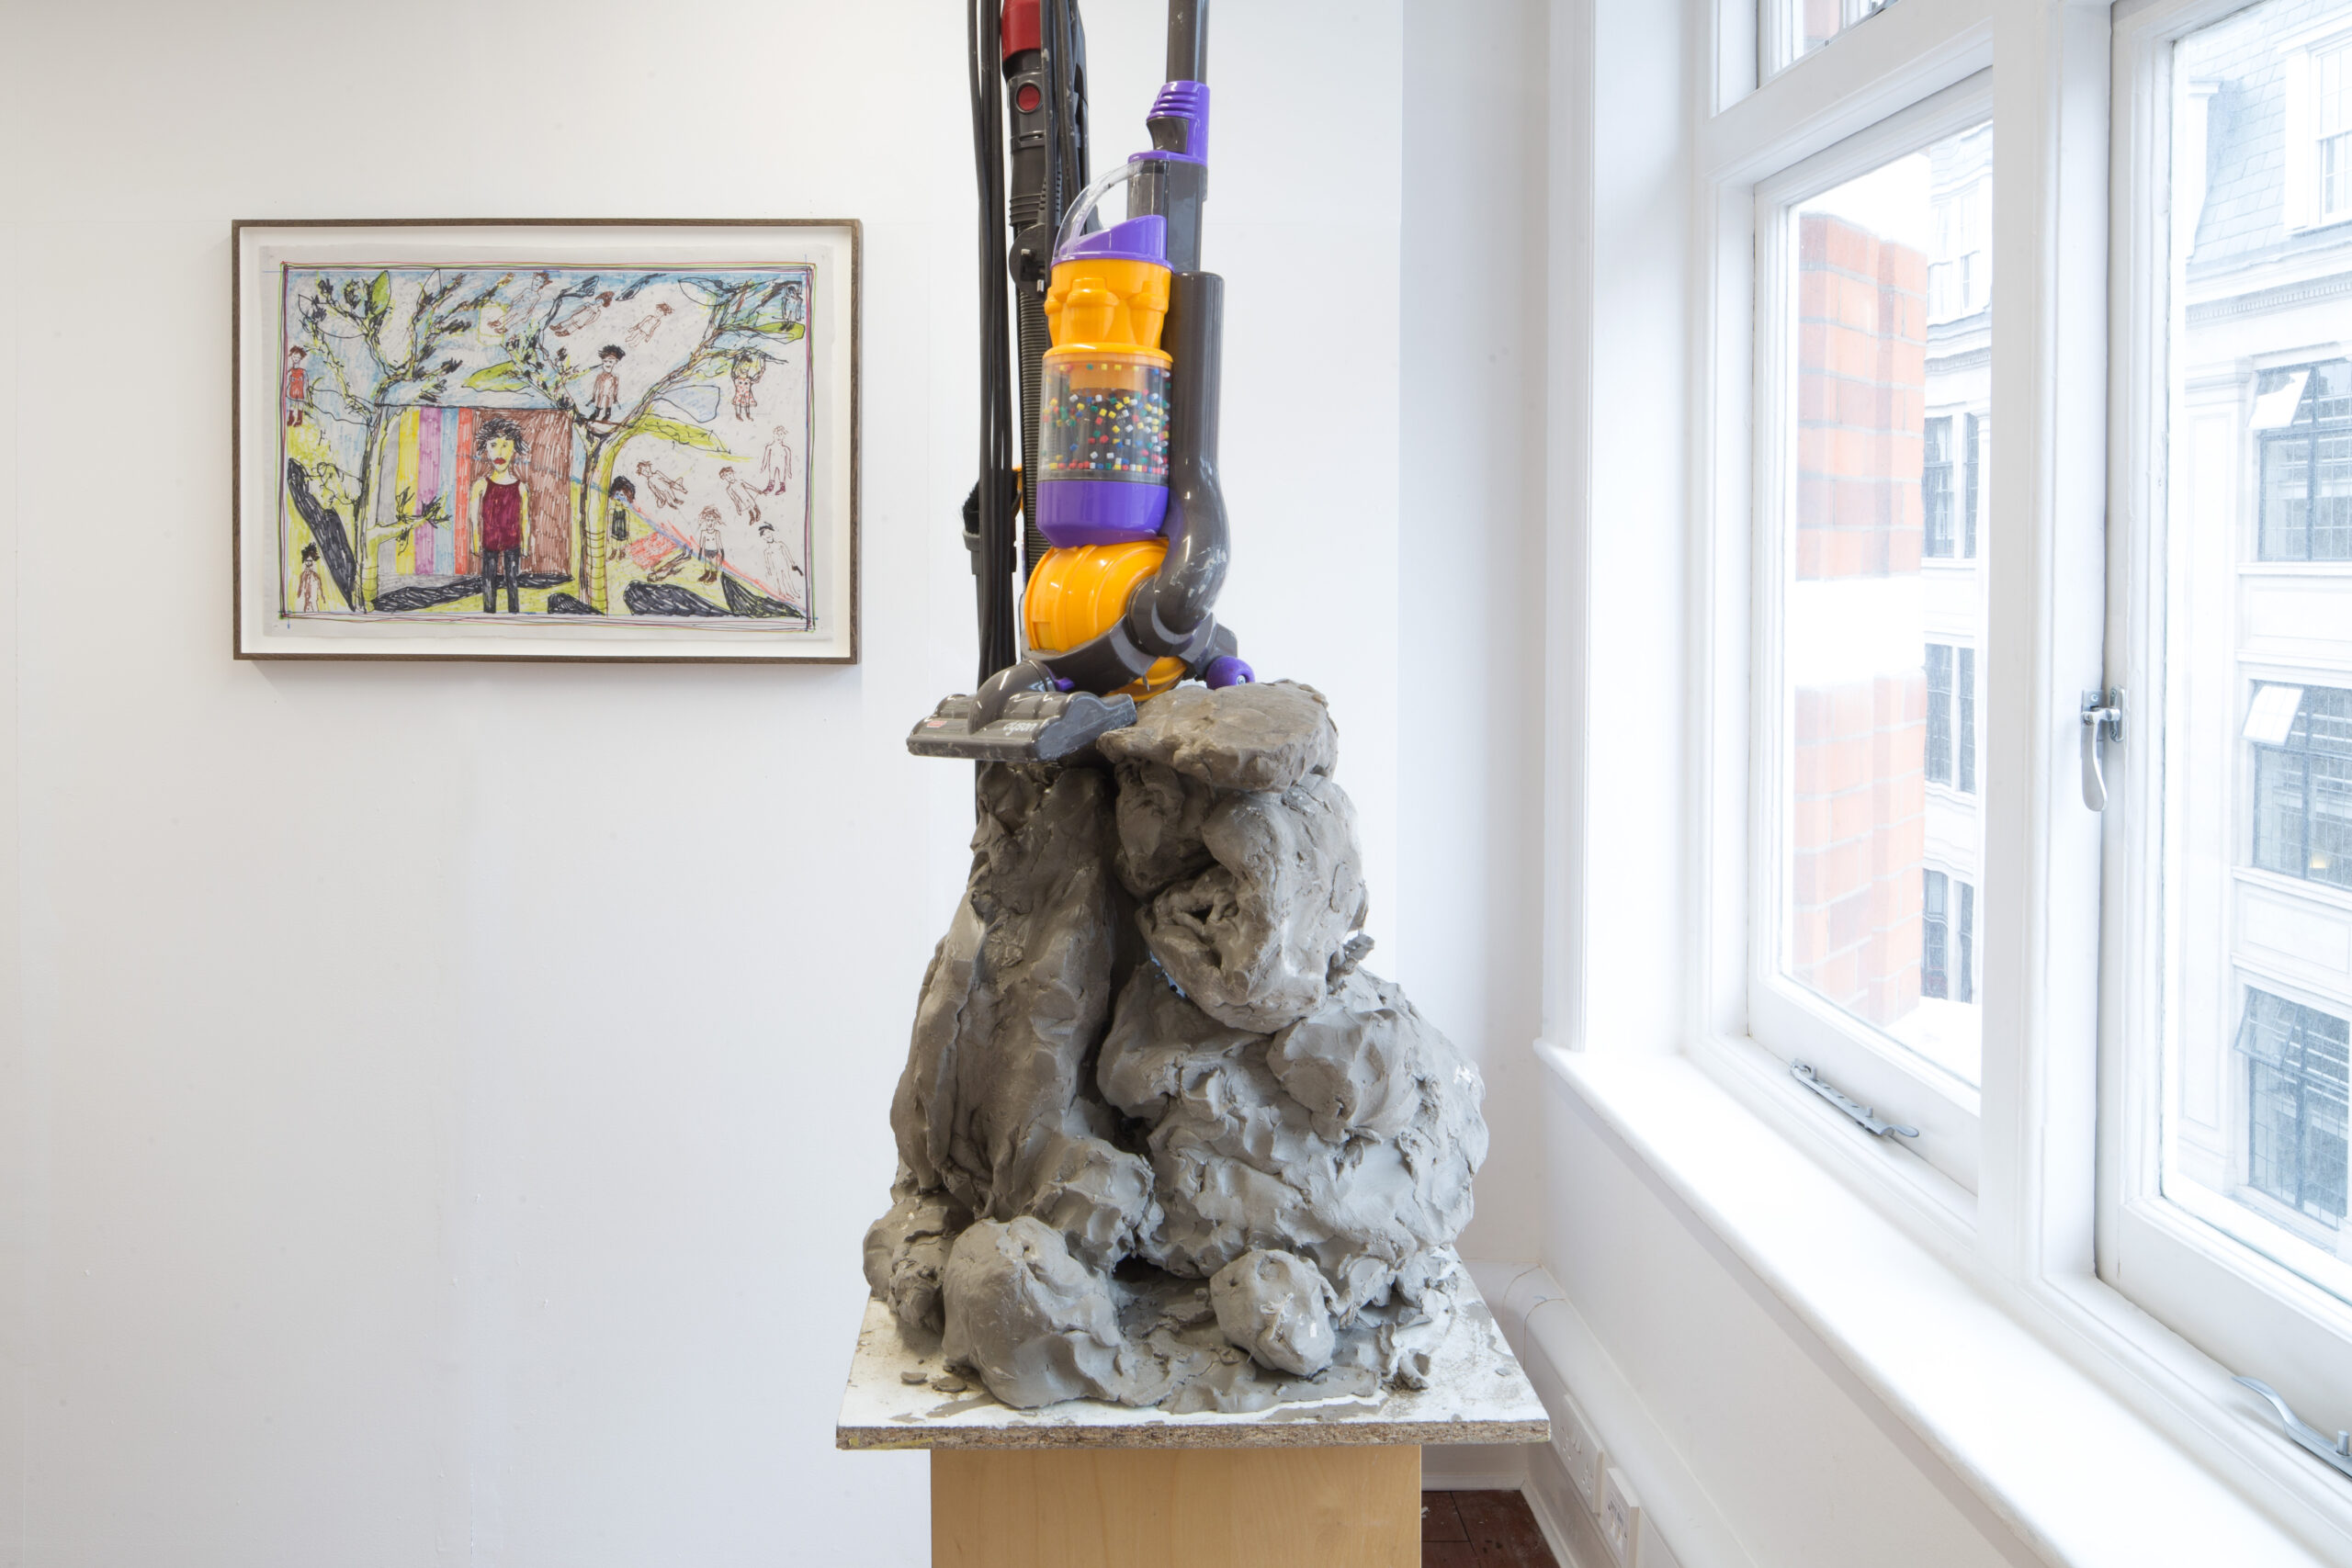 LUNGLEY Gallery moves to Soho, London.